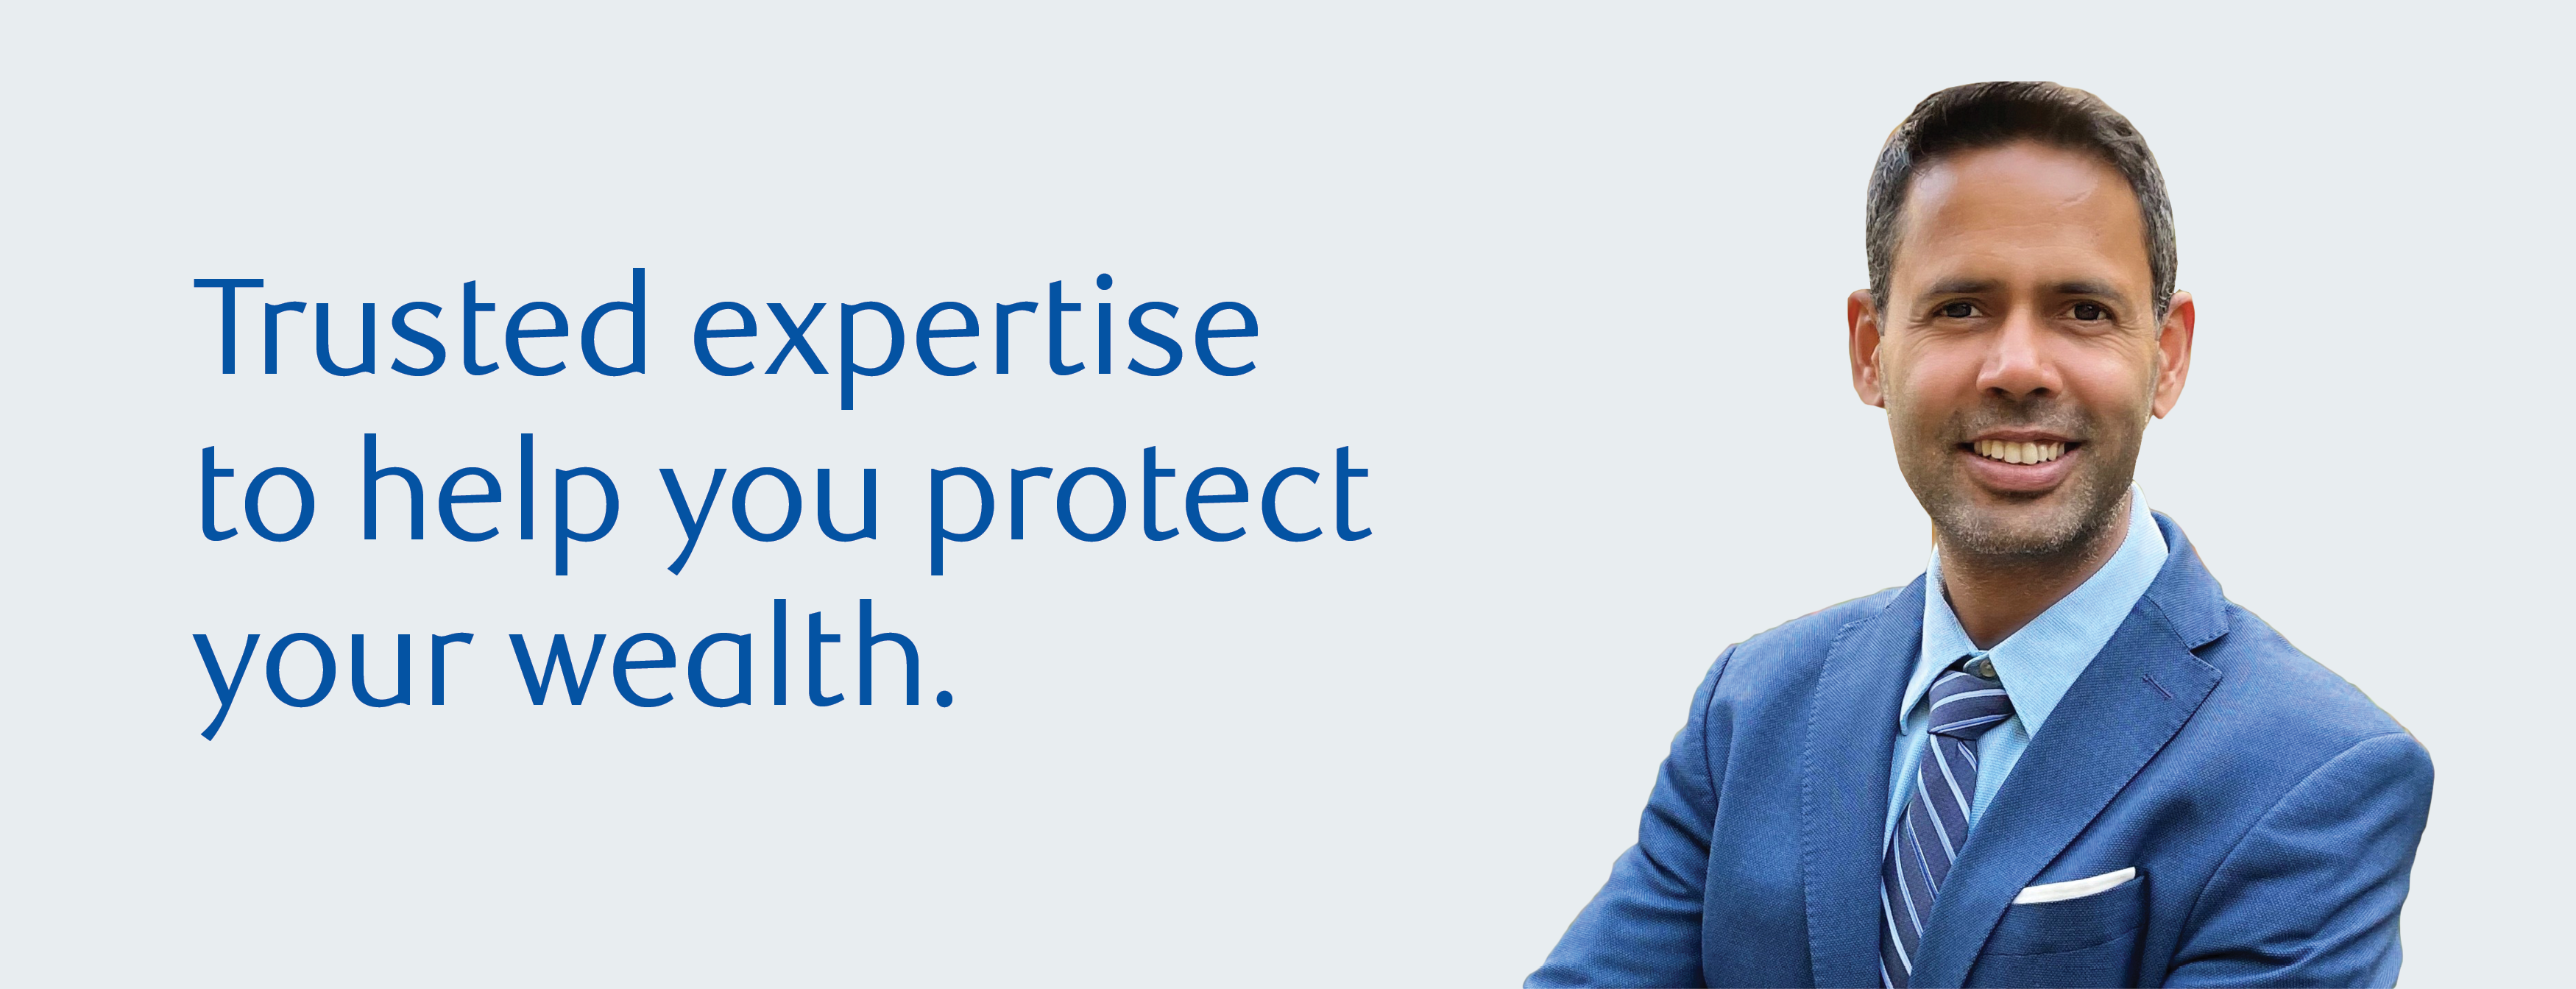 Nicky K. Tahil - Trusted expertise to help you protect your wealth